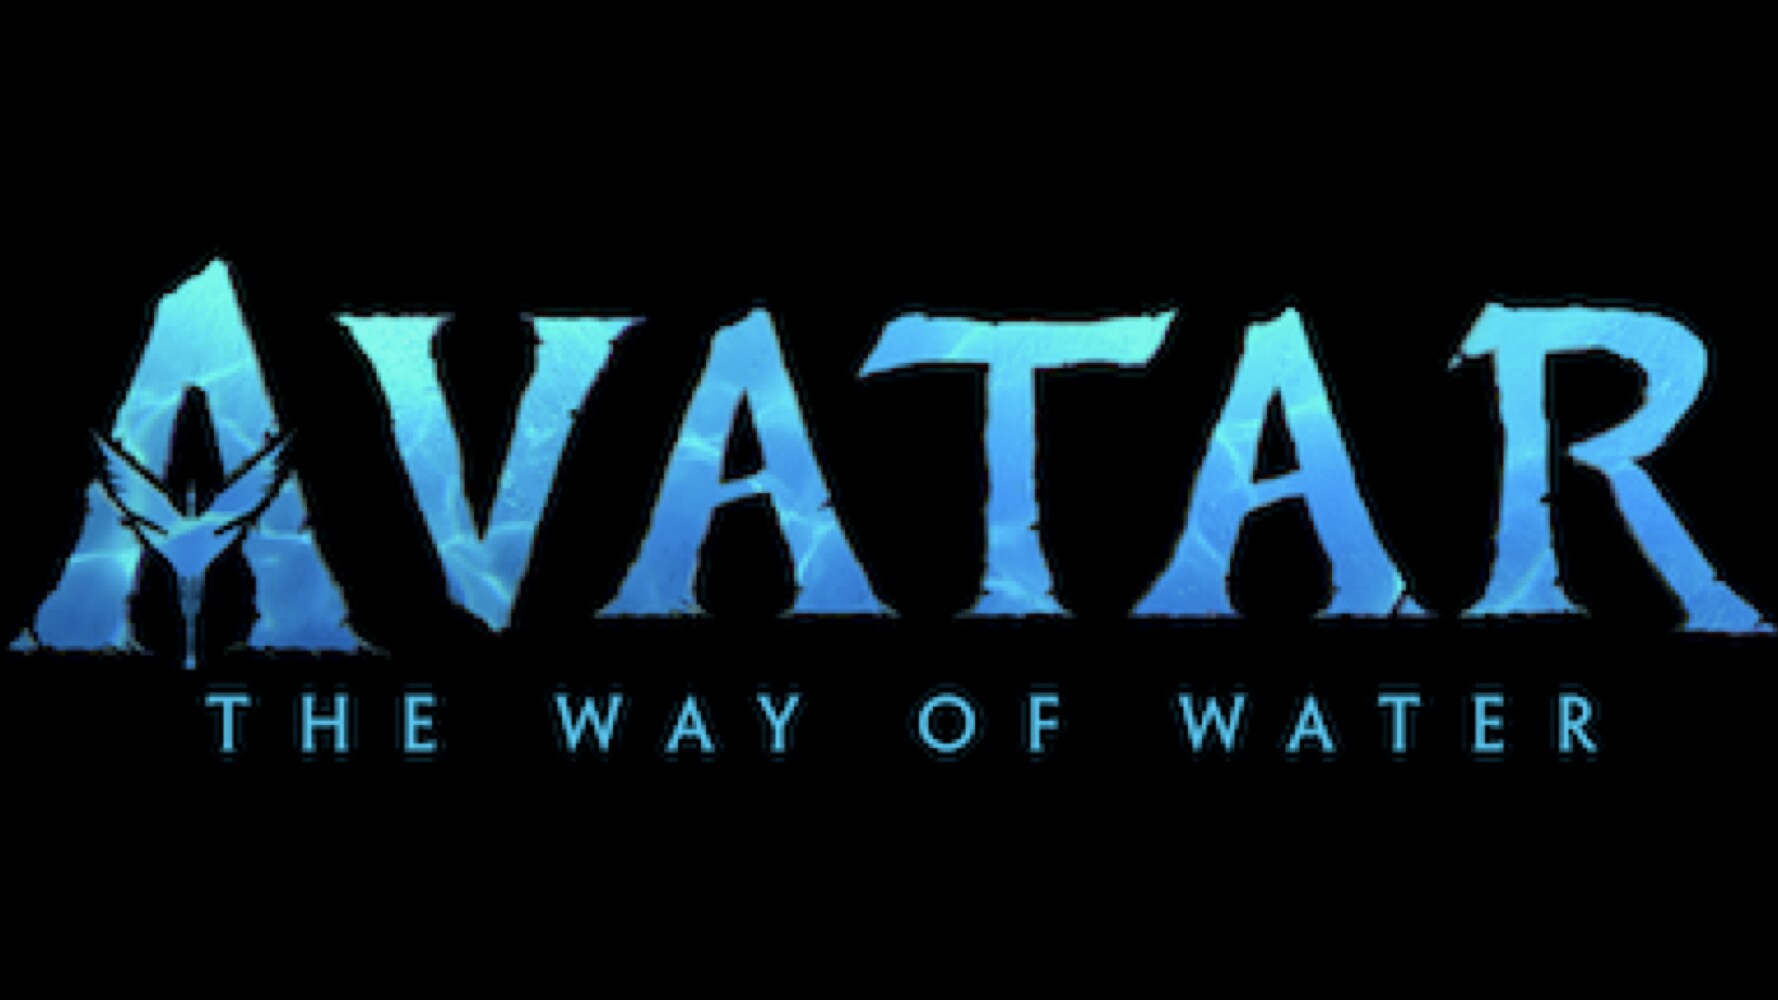 James Cameron’s Global Phenomenon “Avatar: The Way Of Water” To Debut June 7 On Disney+